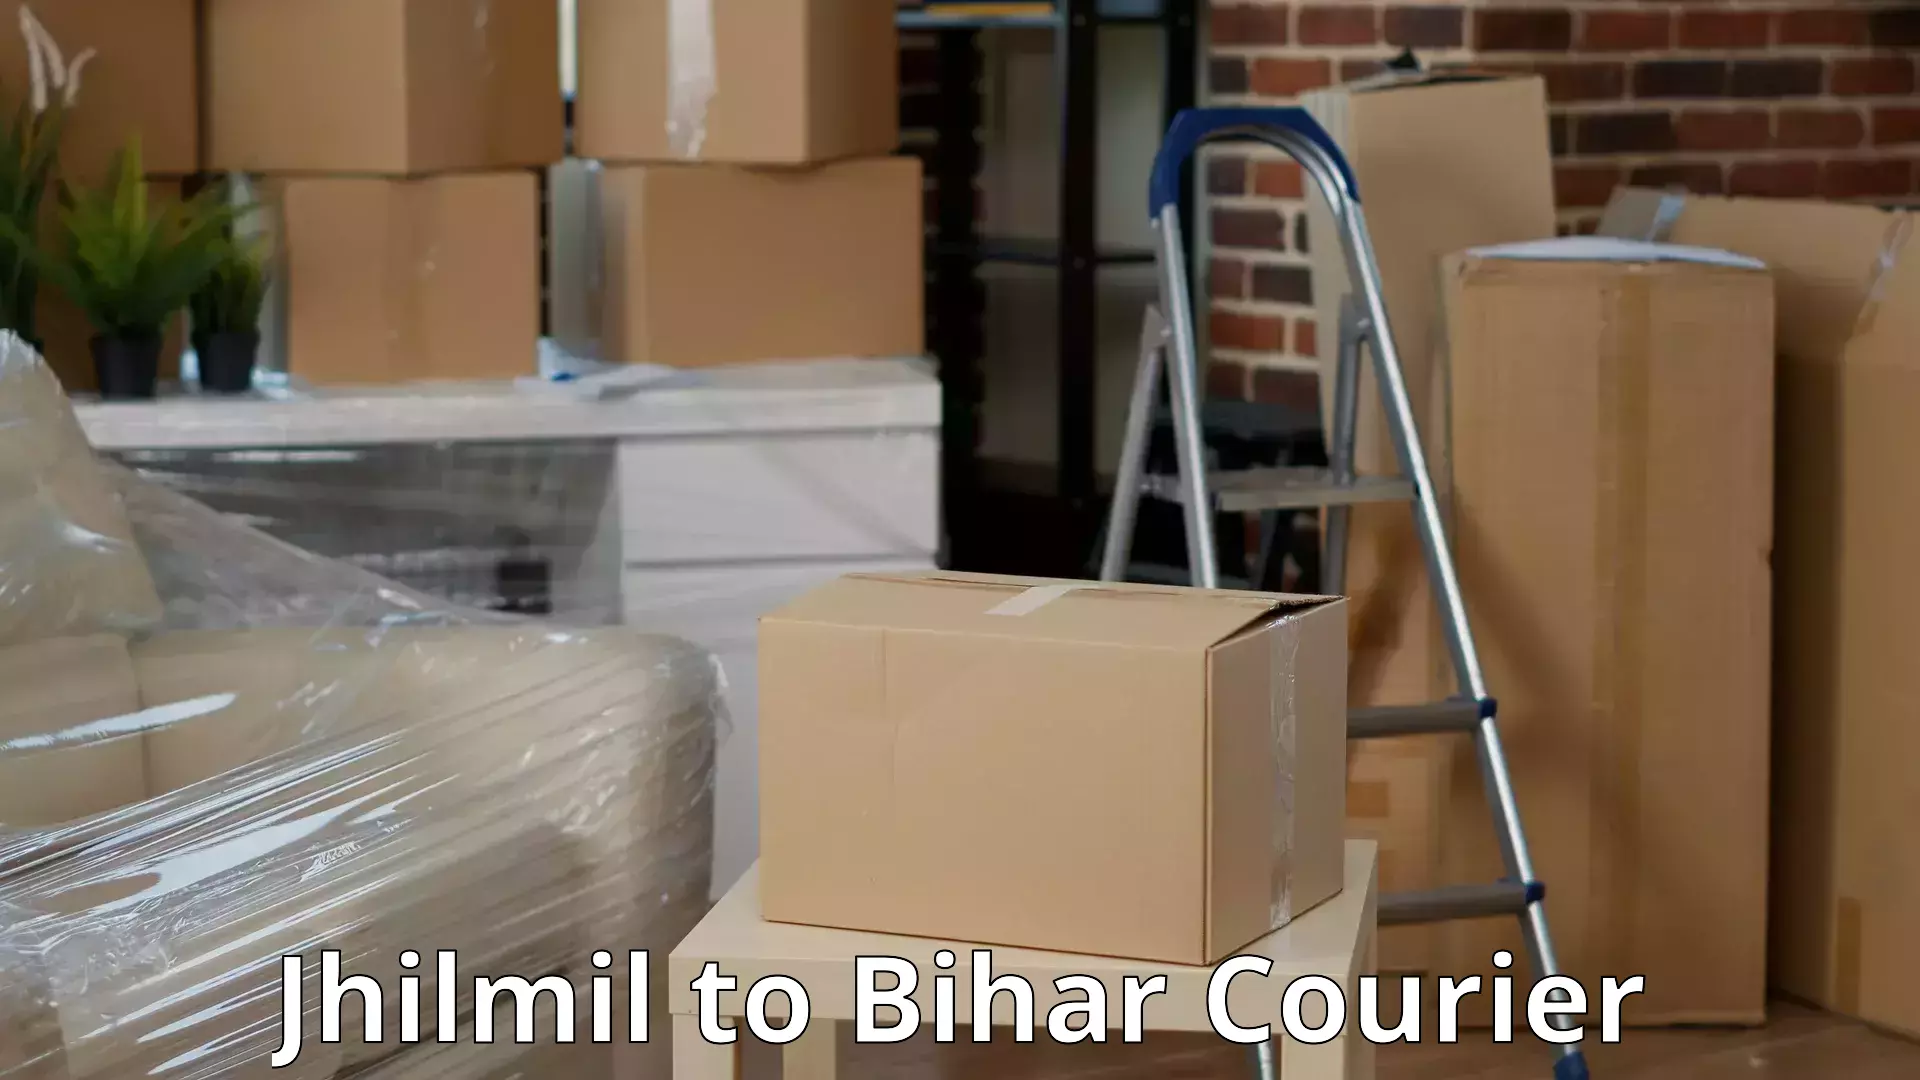 Hassle-free relocation Jhilmil to Alamnagar